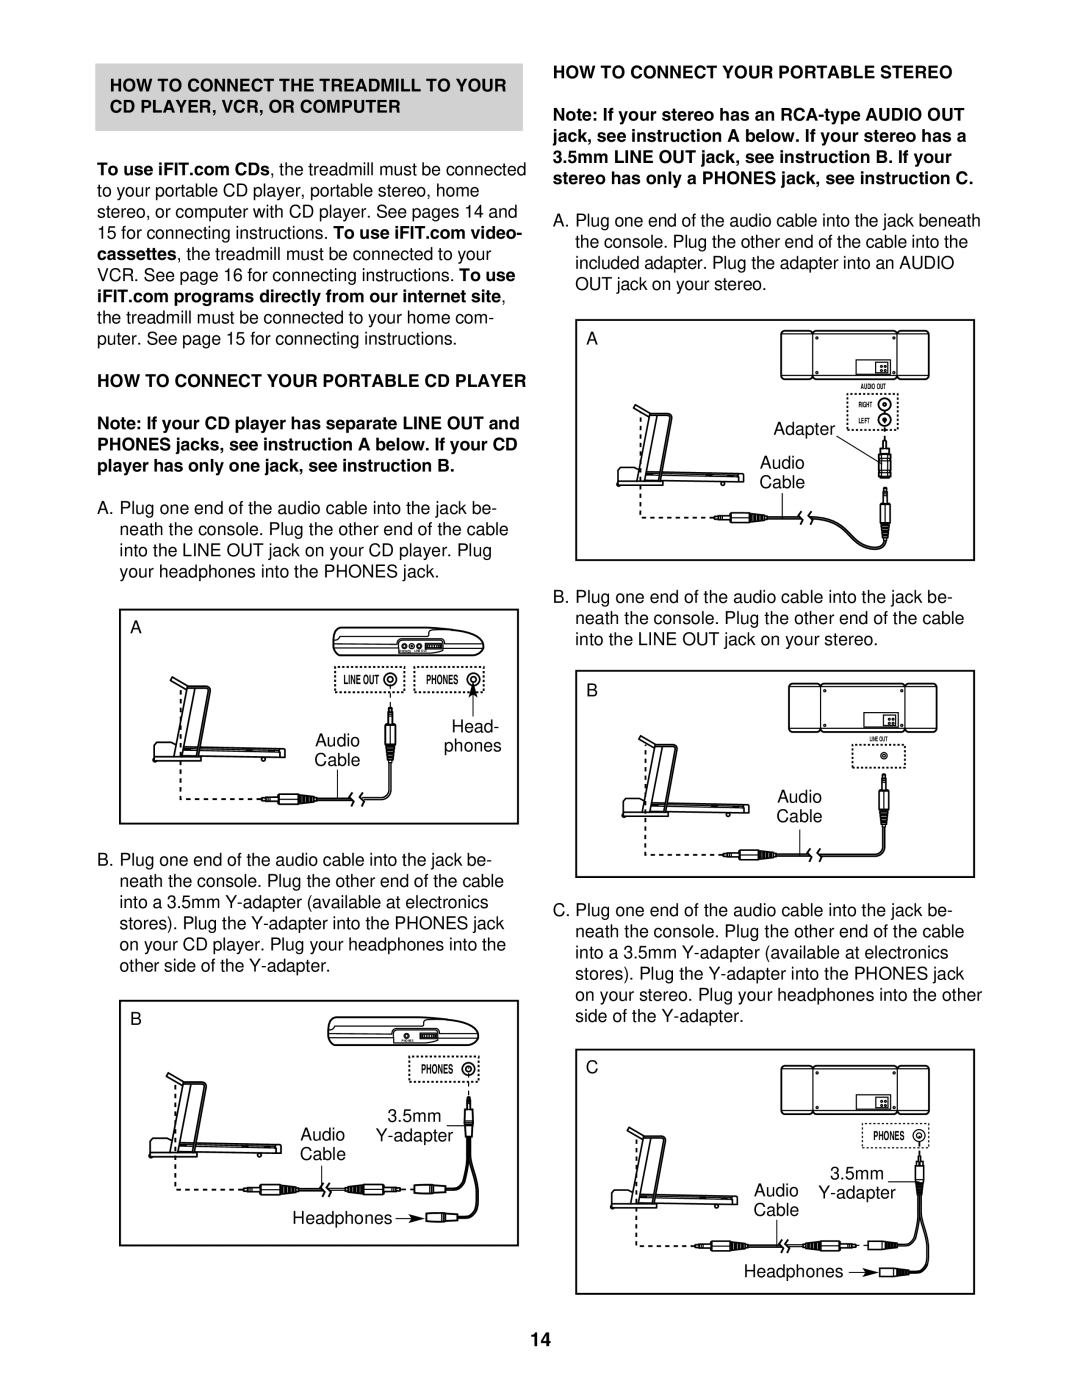 Image IMTL39526 user manual HOW to Connect Your Portable Stereo 